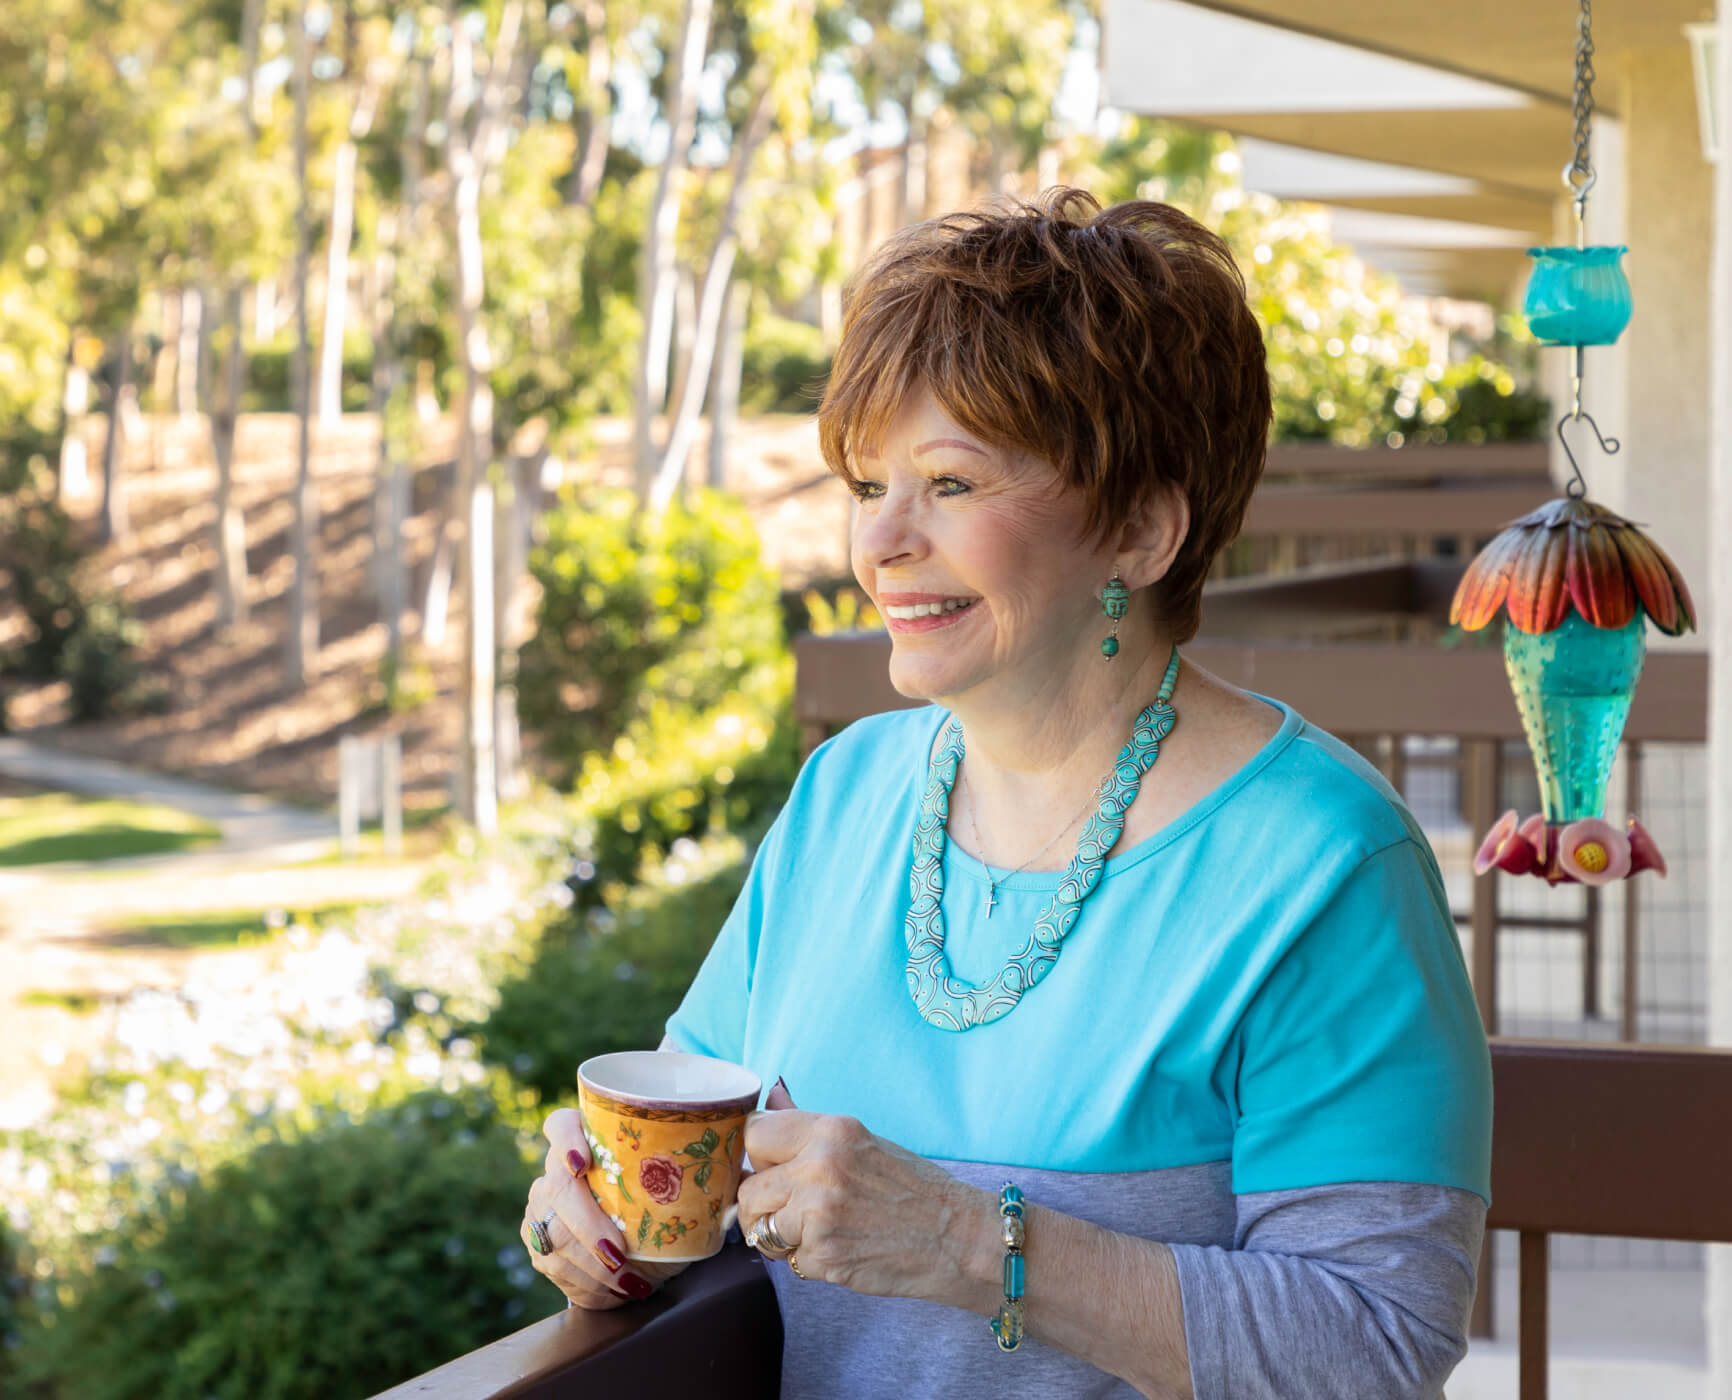 Senior woman standing on a balcony holding a mug and smiling